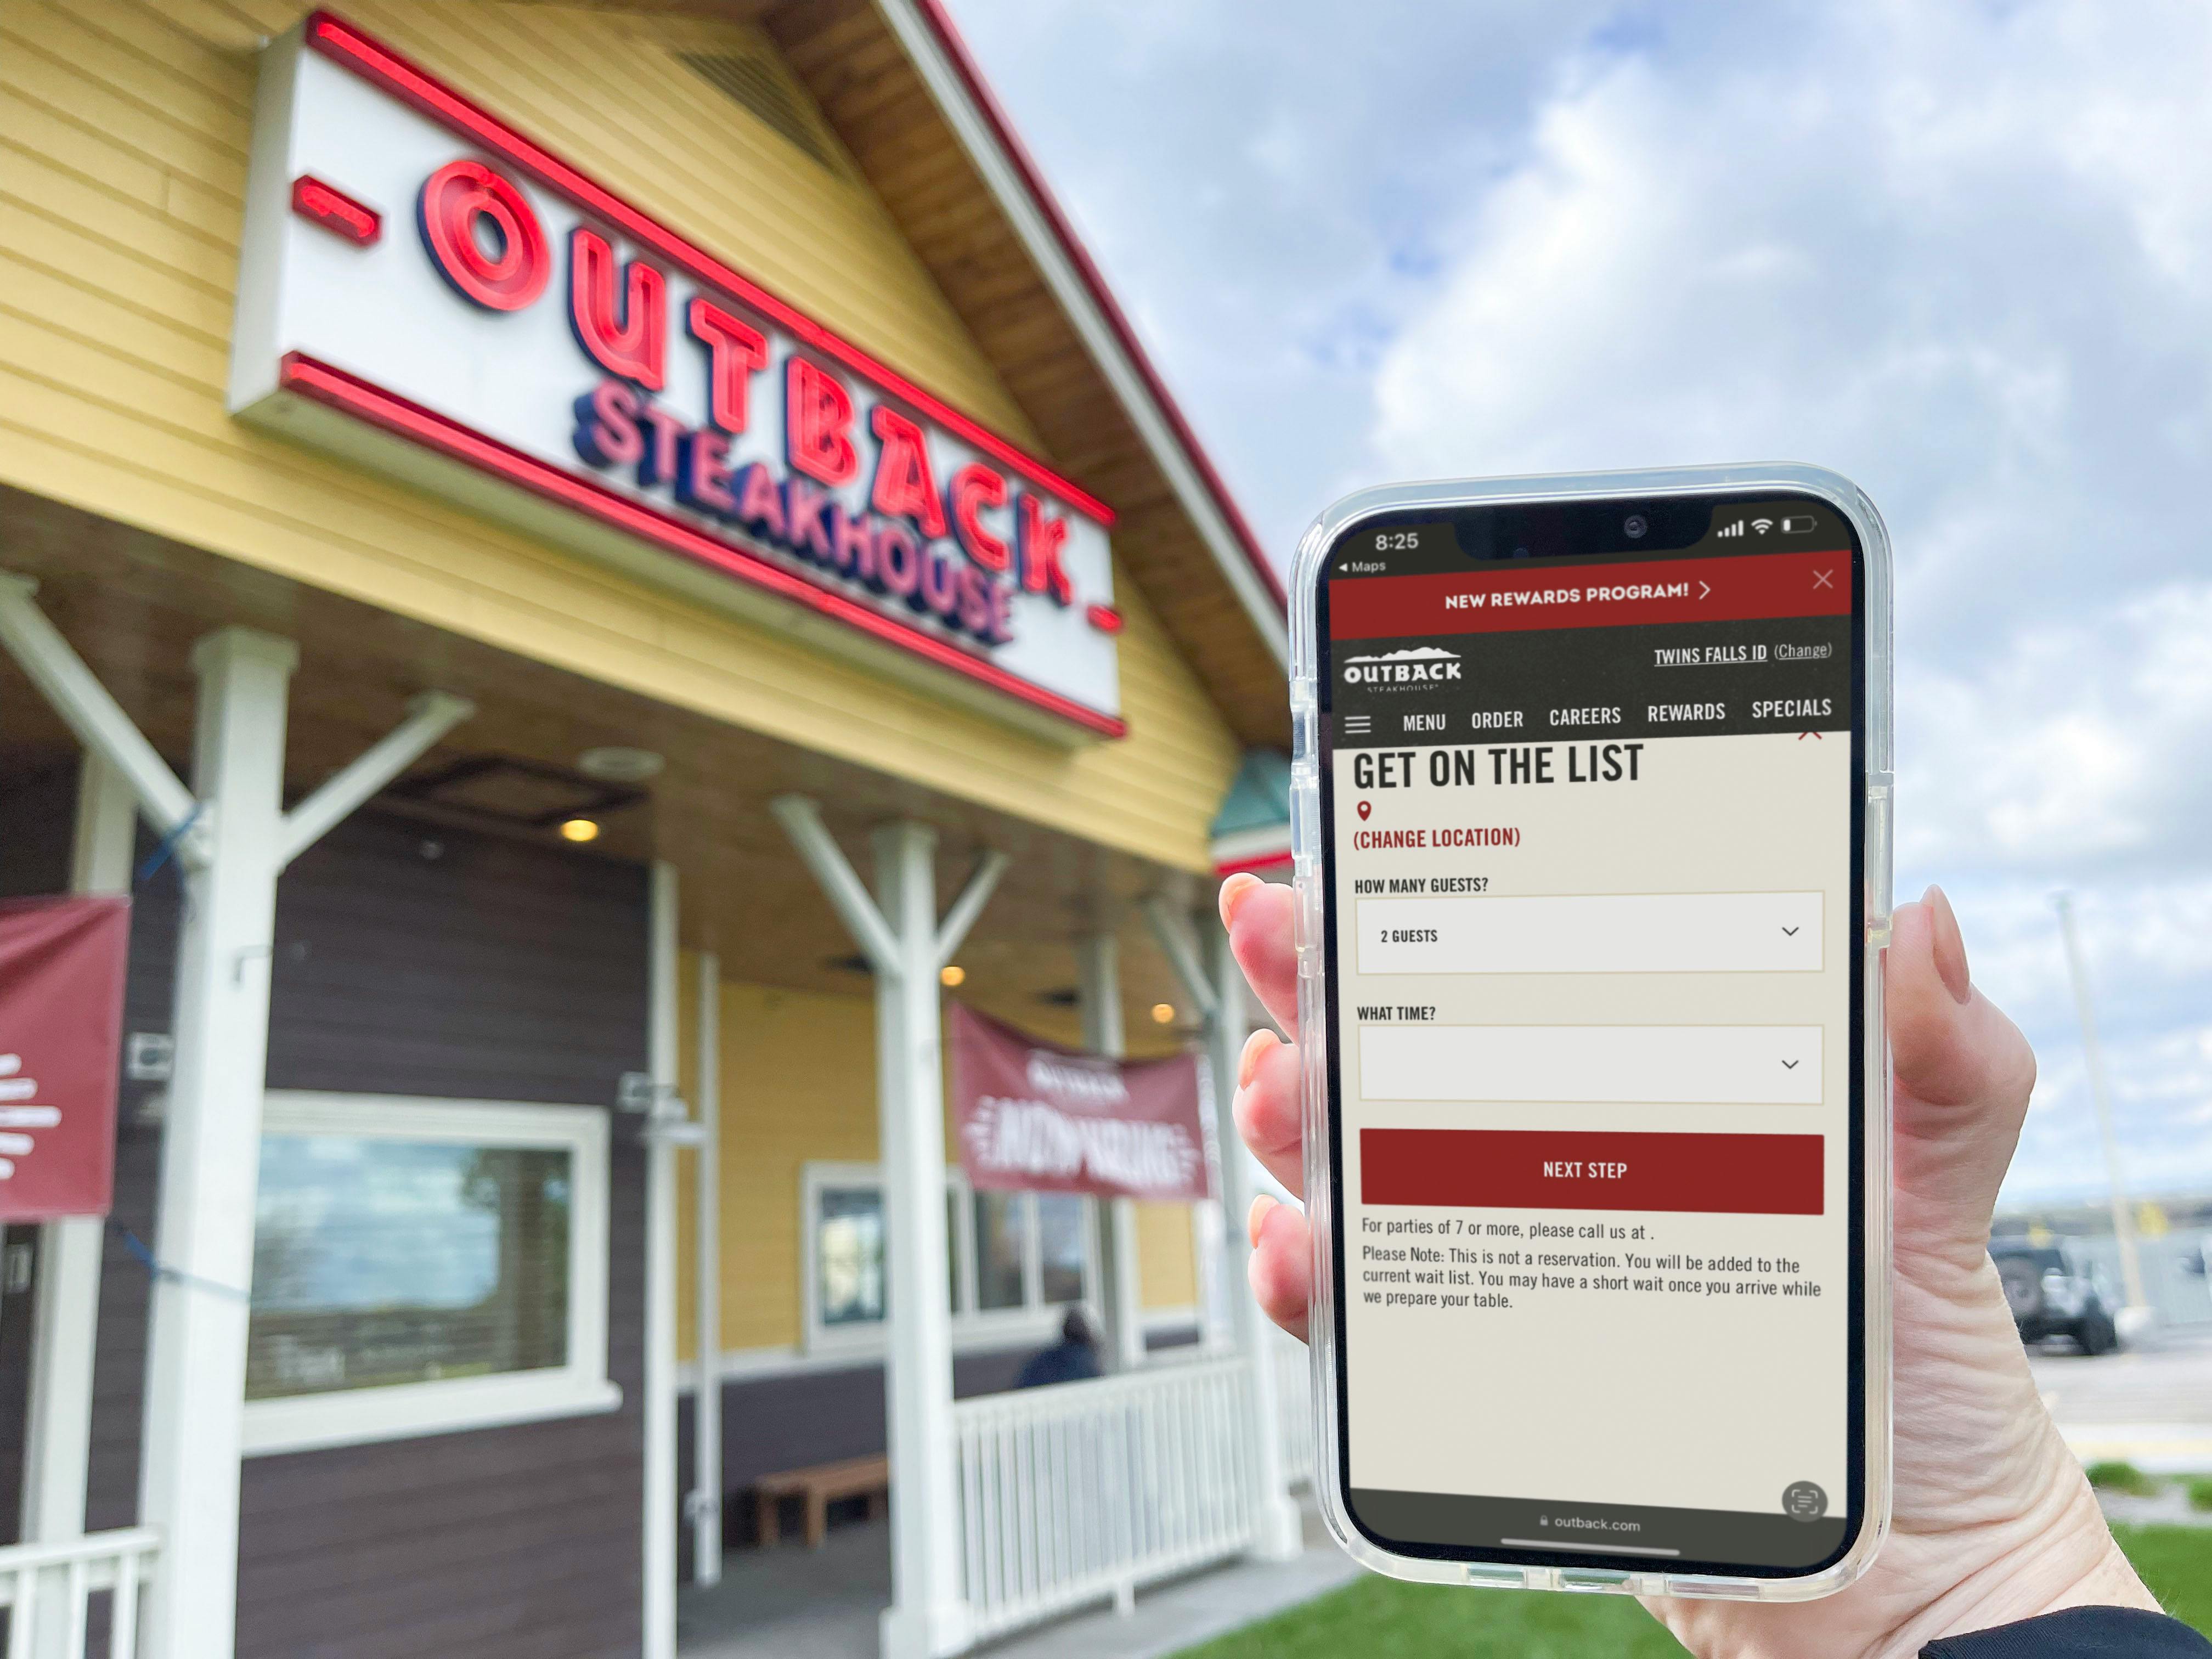 A person's hand holding up a cell phone displaying the Outback Steakhouse online waitlist form in front of an Outback Steakhouse restaurant.